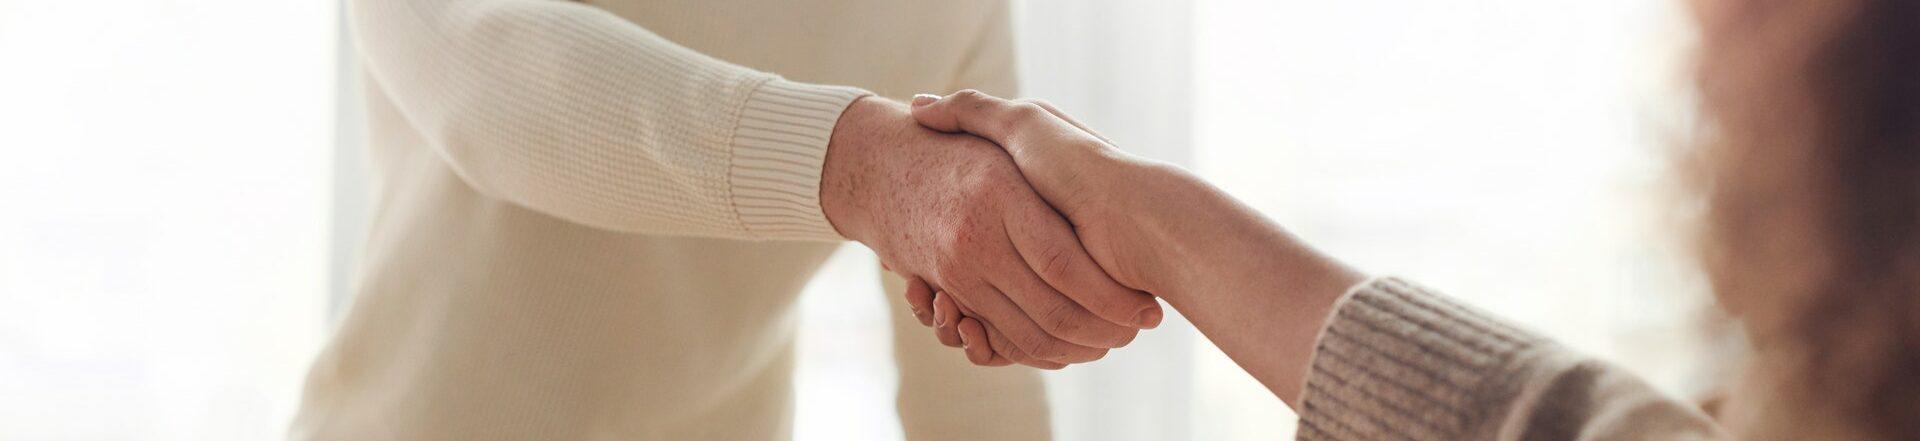 Two people shaking hands after making an agreement